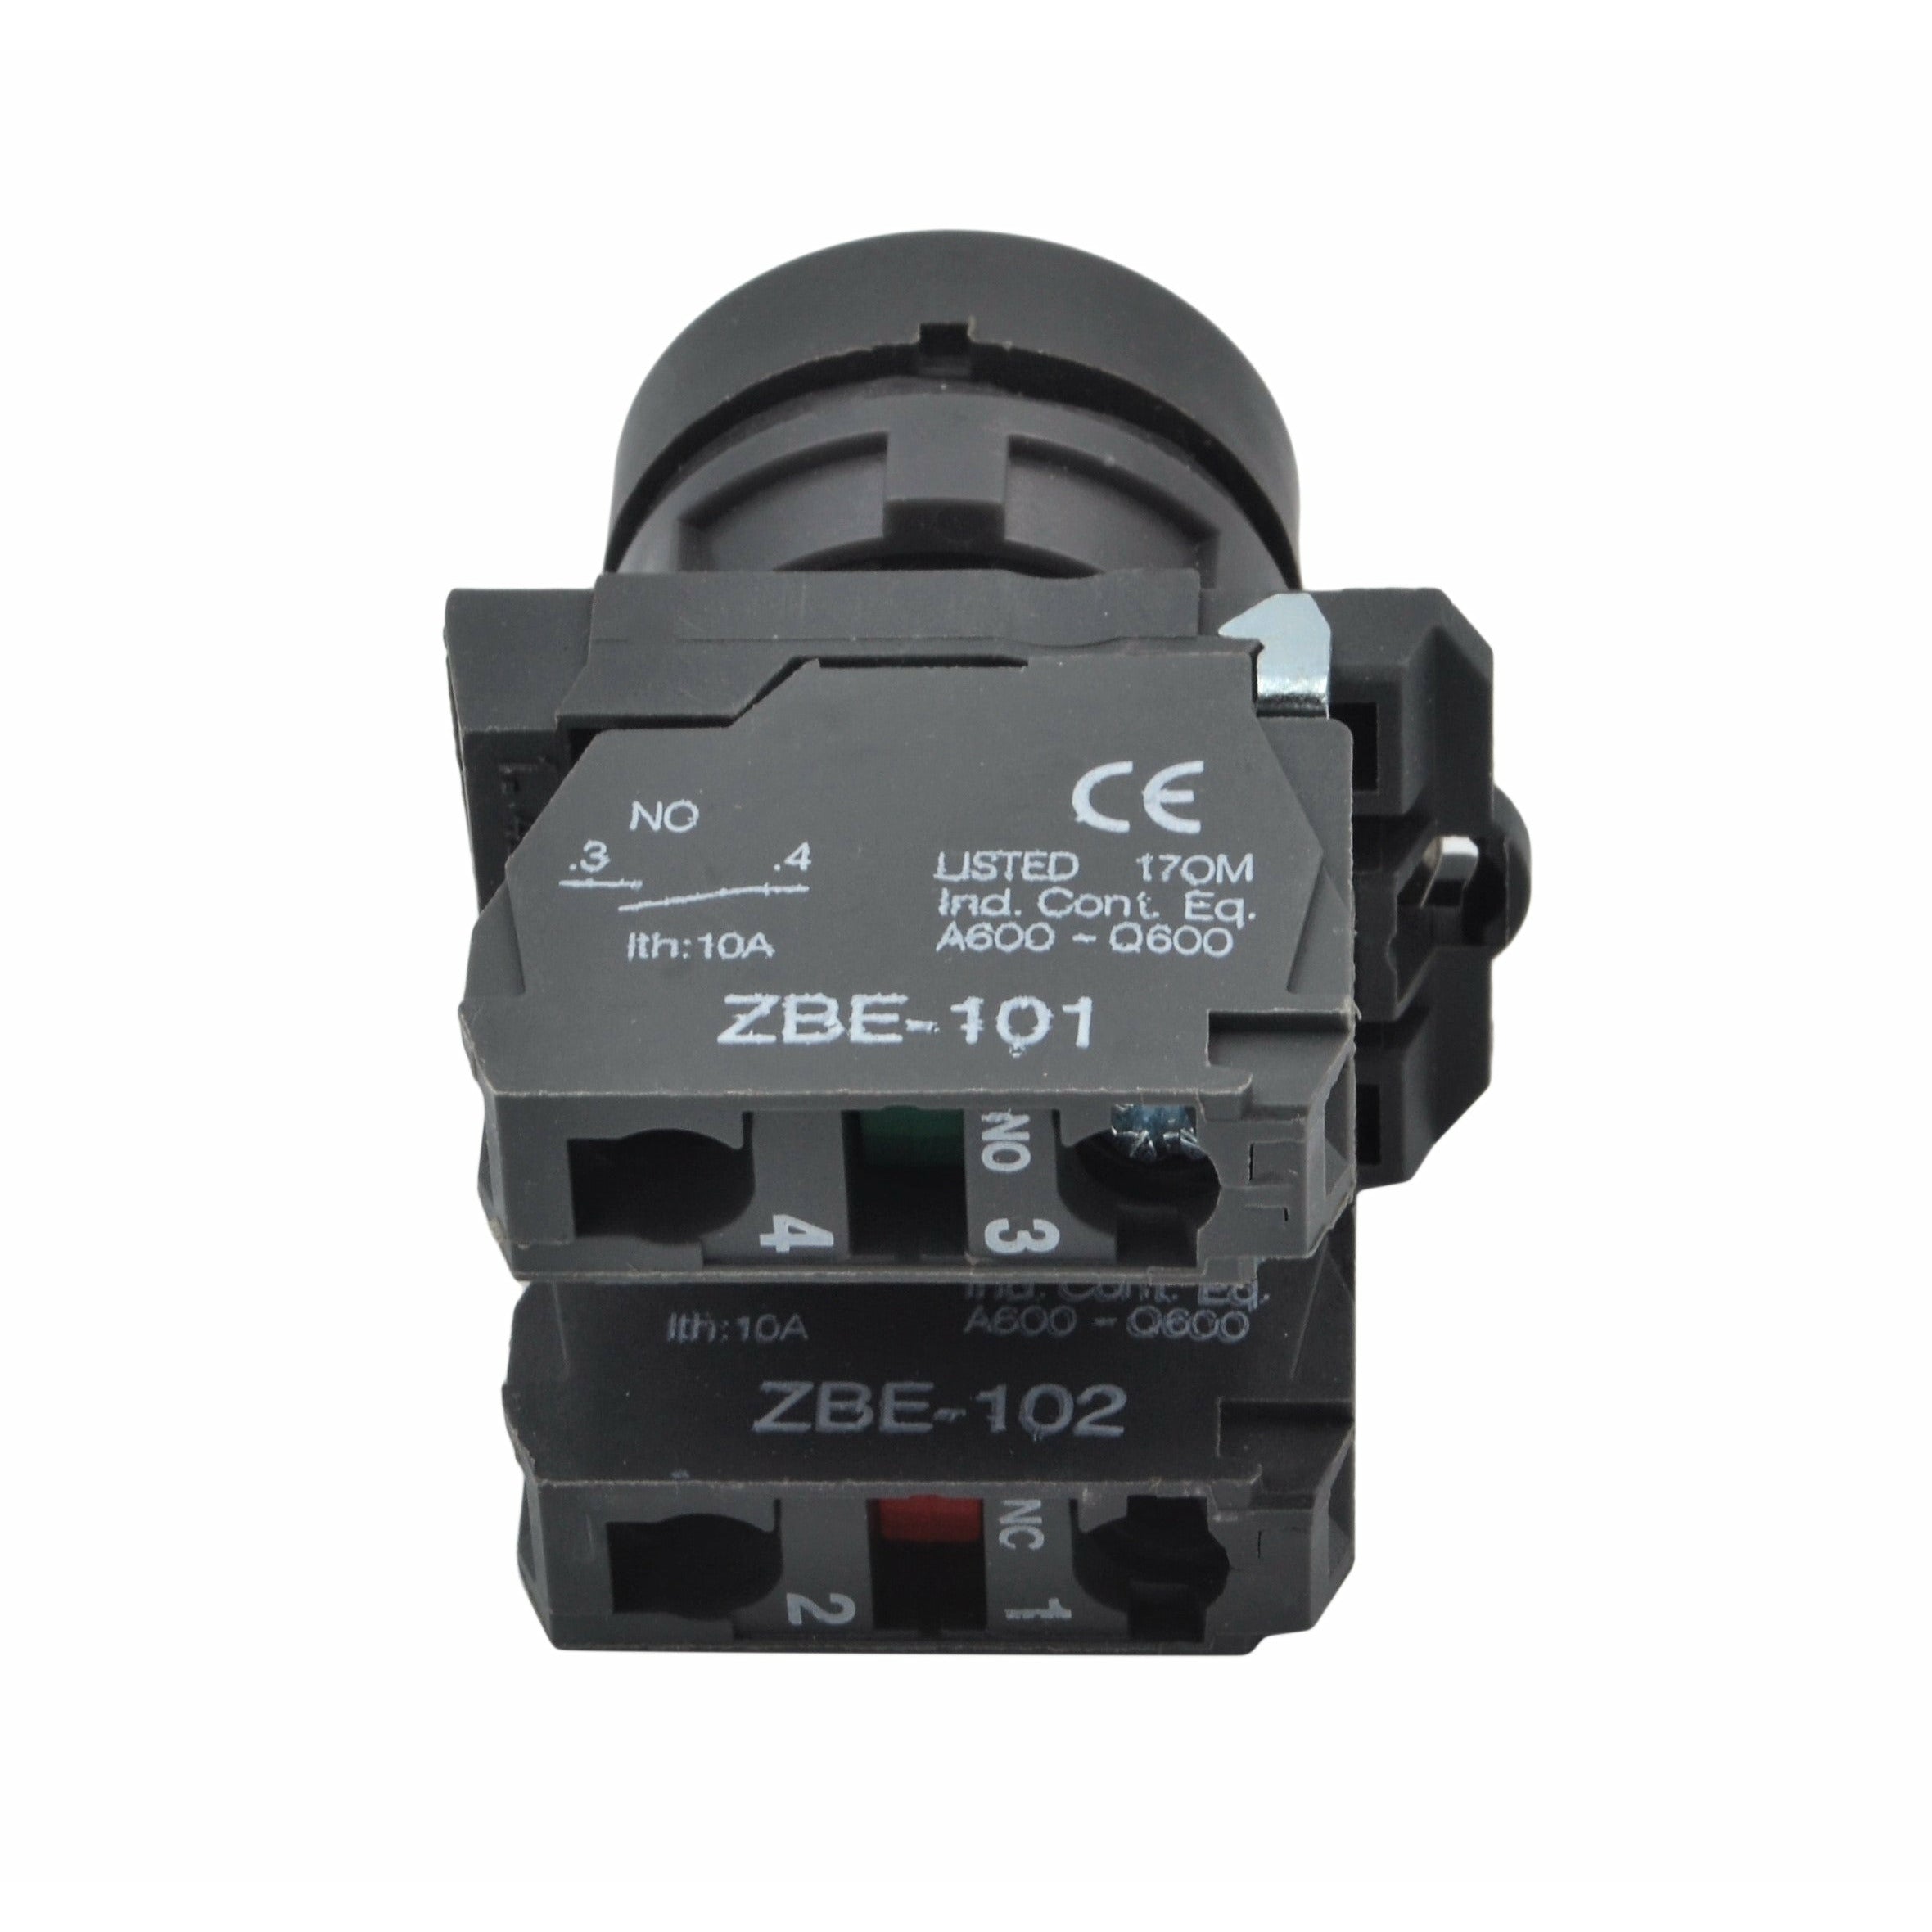 XB5AA45 Generic Red Panel Mount Switch